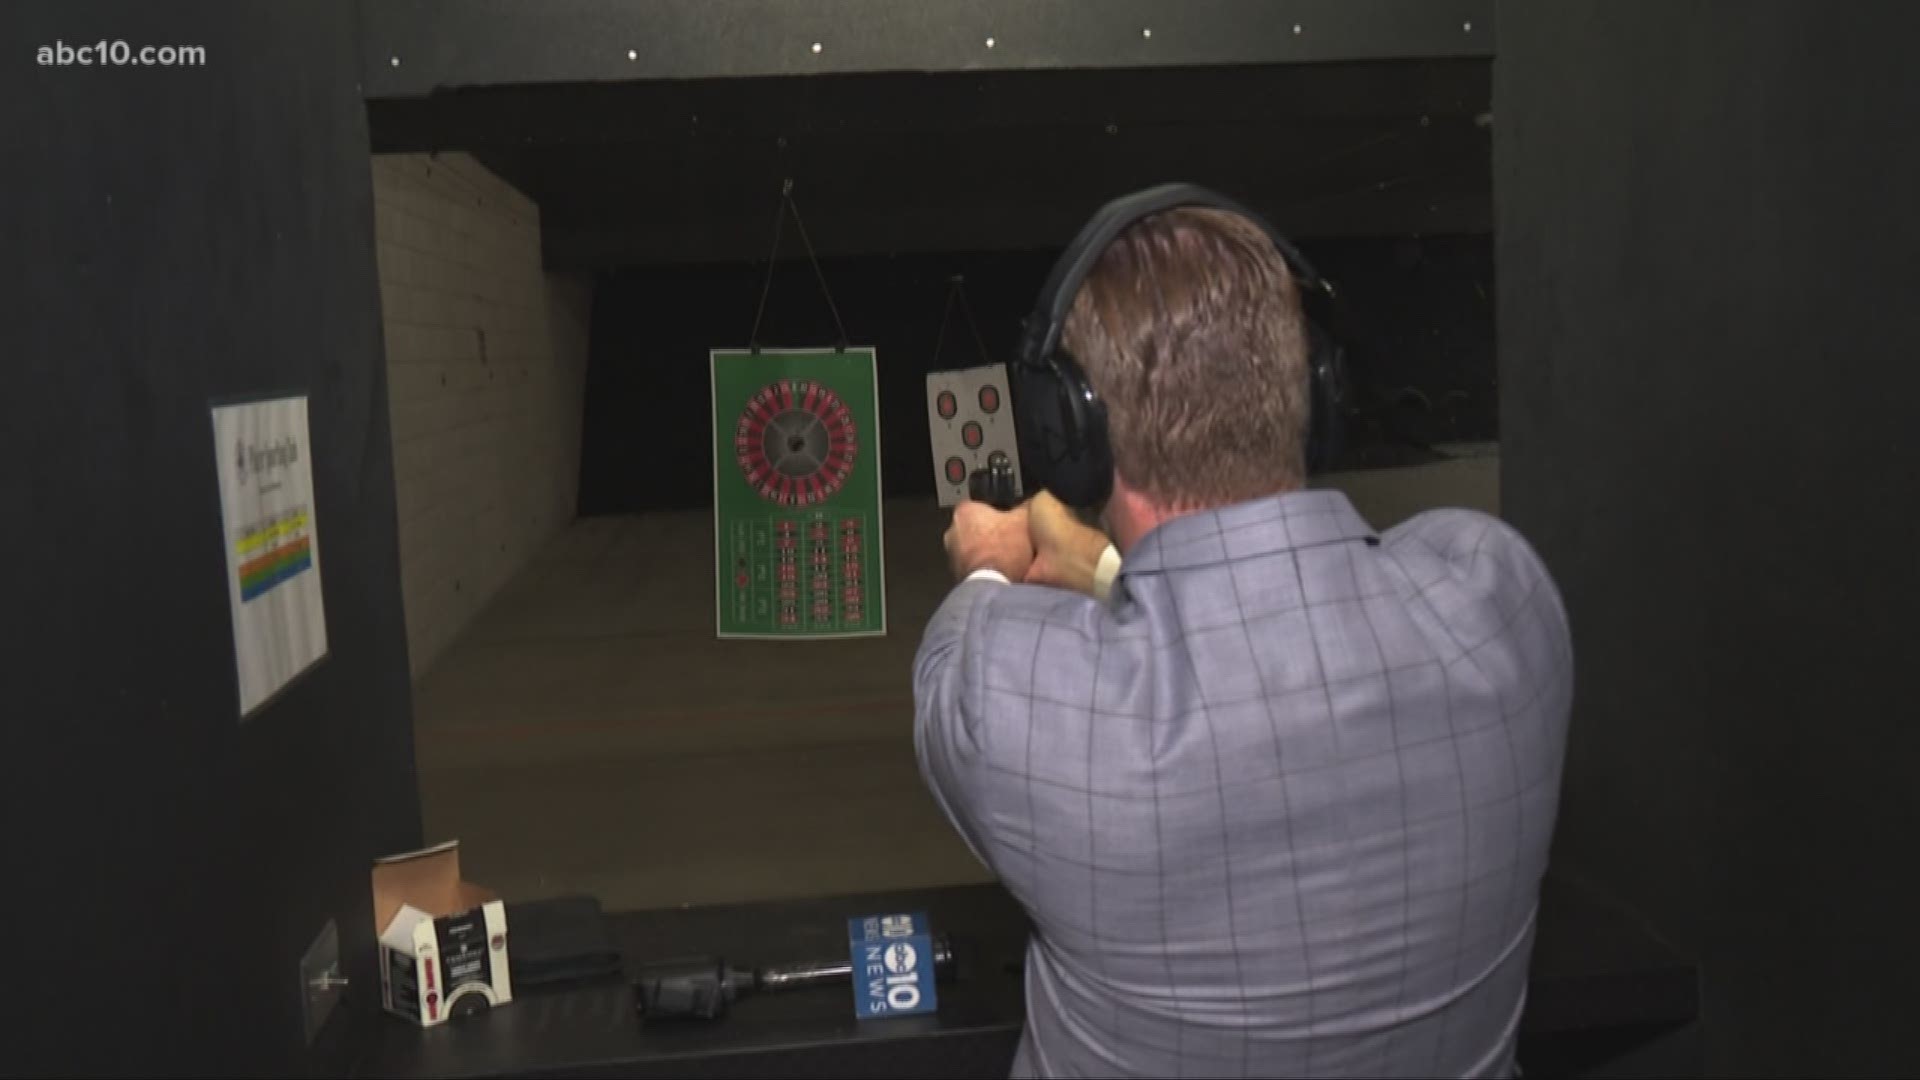 Gun experts at the Placer Sporting Club in Roseville are teaching Mark S. Allen how to shoot while raising funds for a woman battling the rare disease Scleroderma.